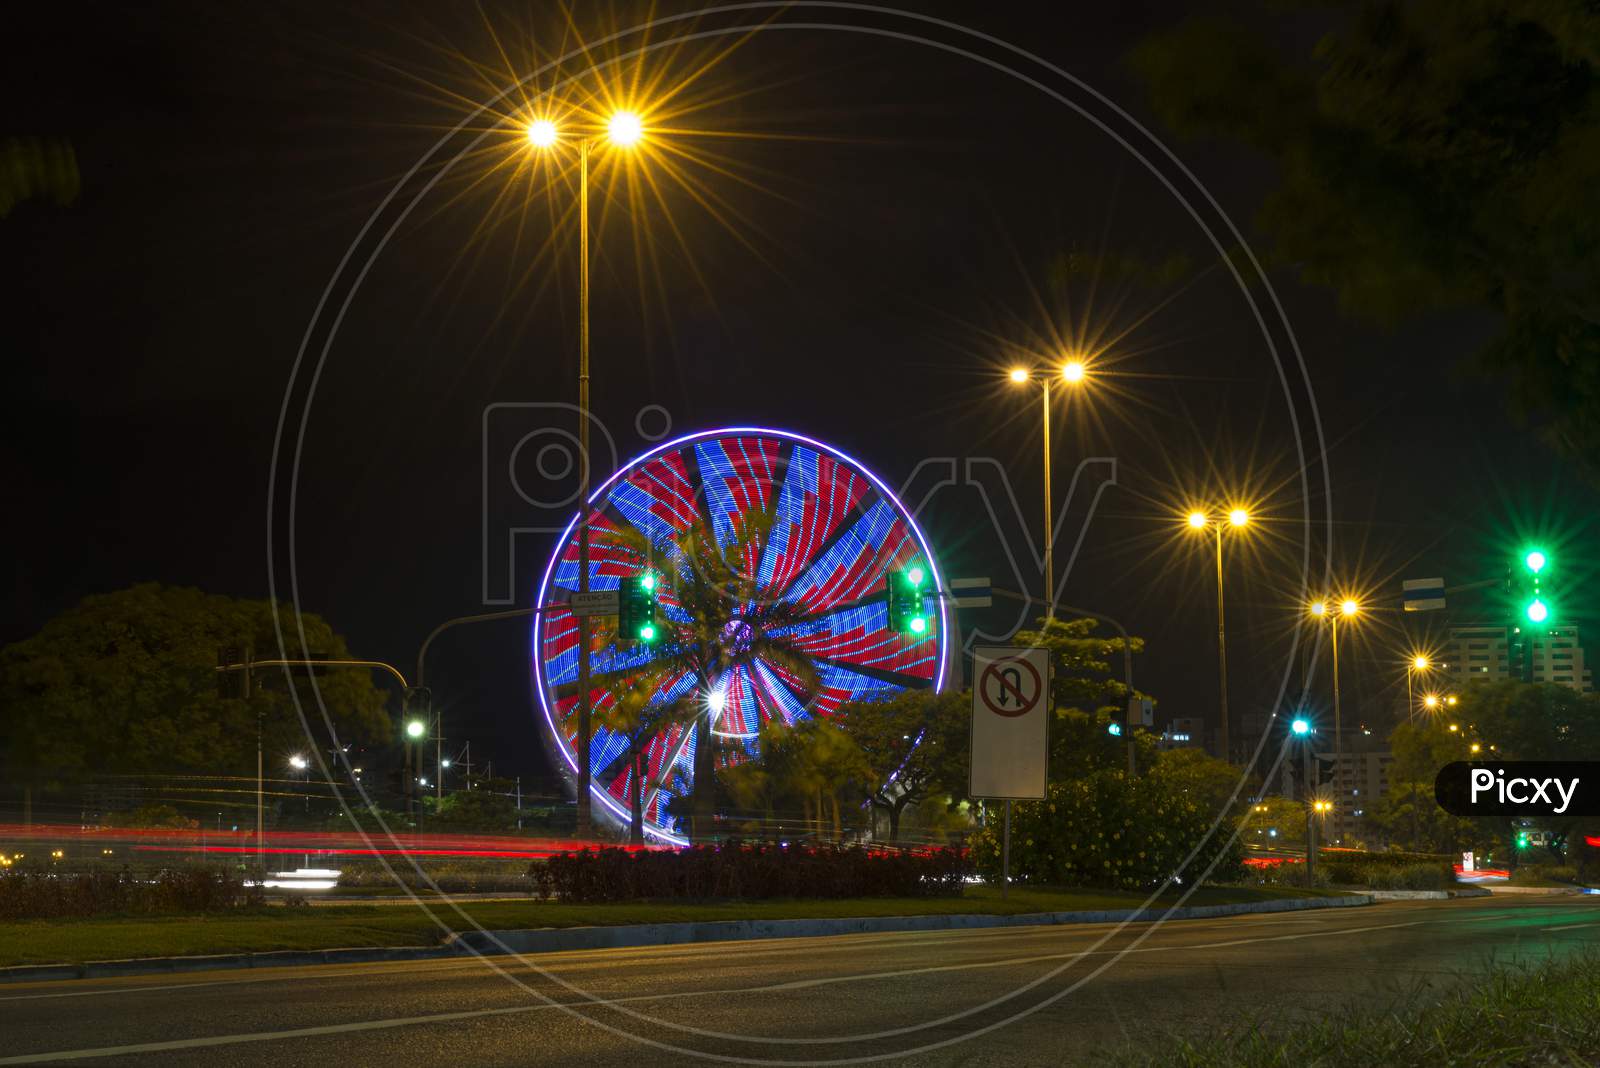 Long Exposure Of Colorful Ferris Wheel And Light Trails On The Expressway Road At Night.